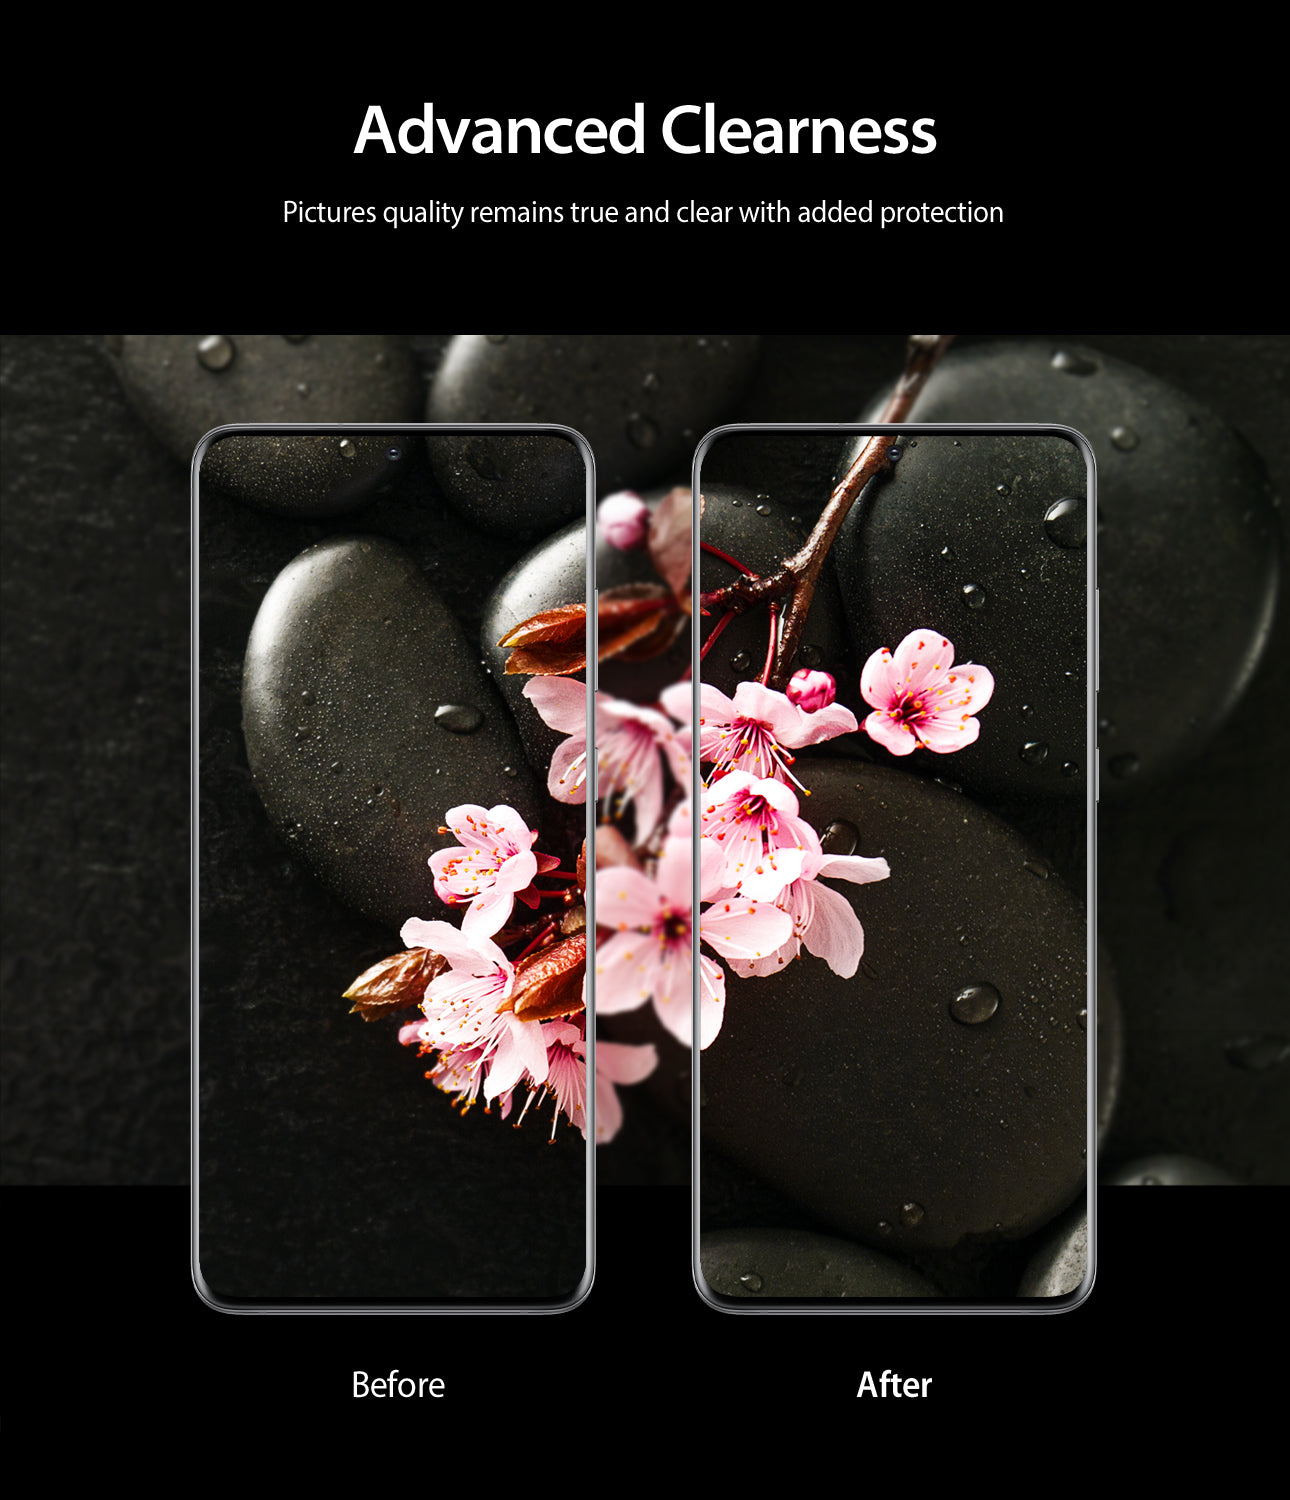 advanced clearness - picture quality remain true and clear